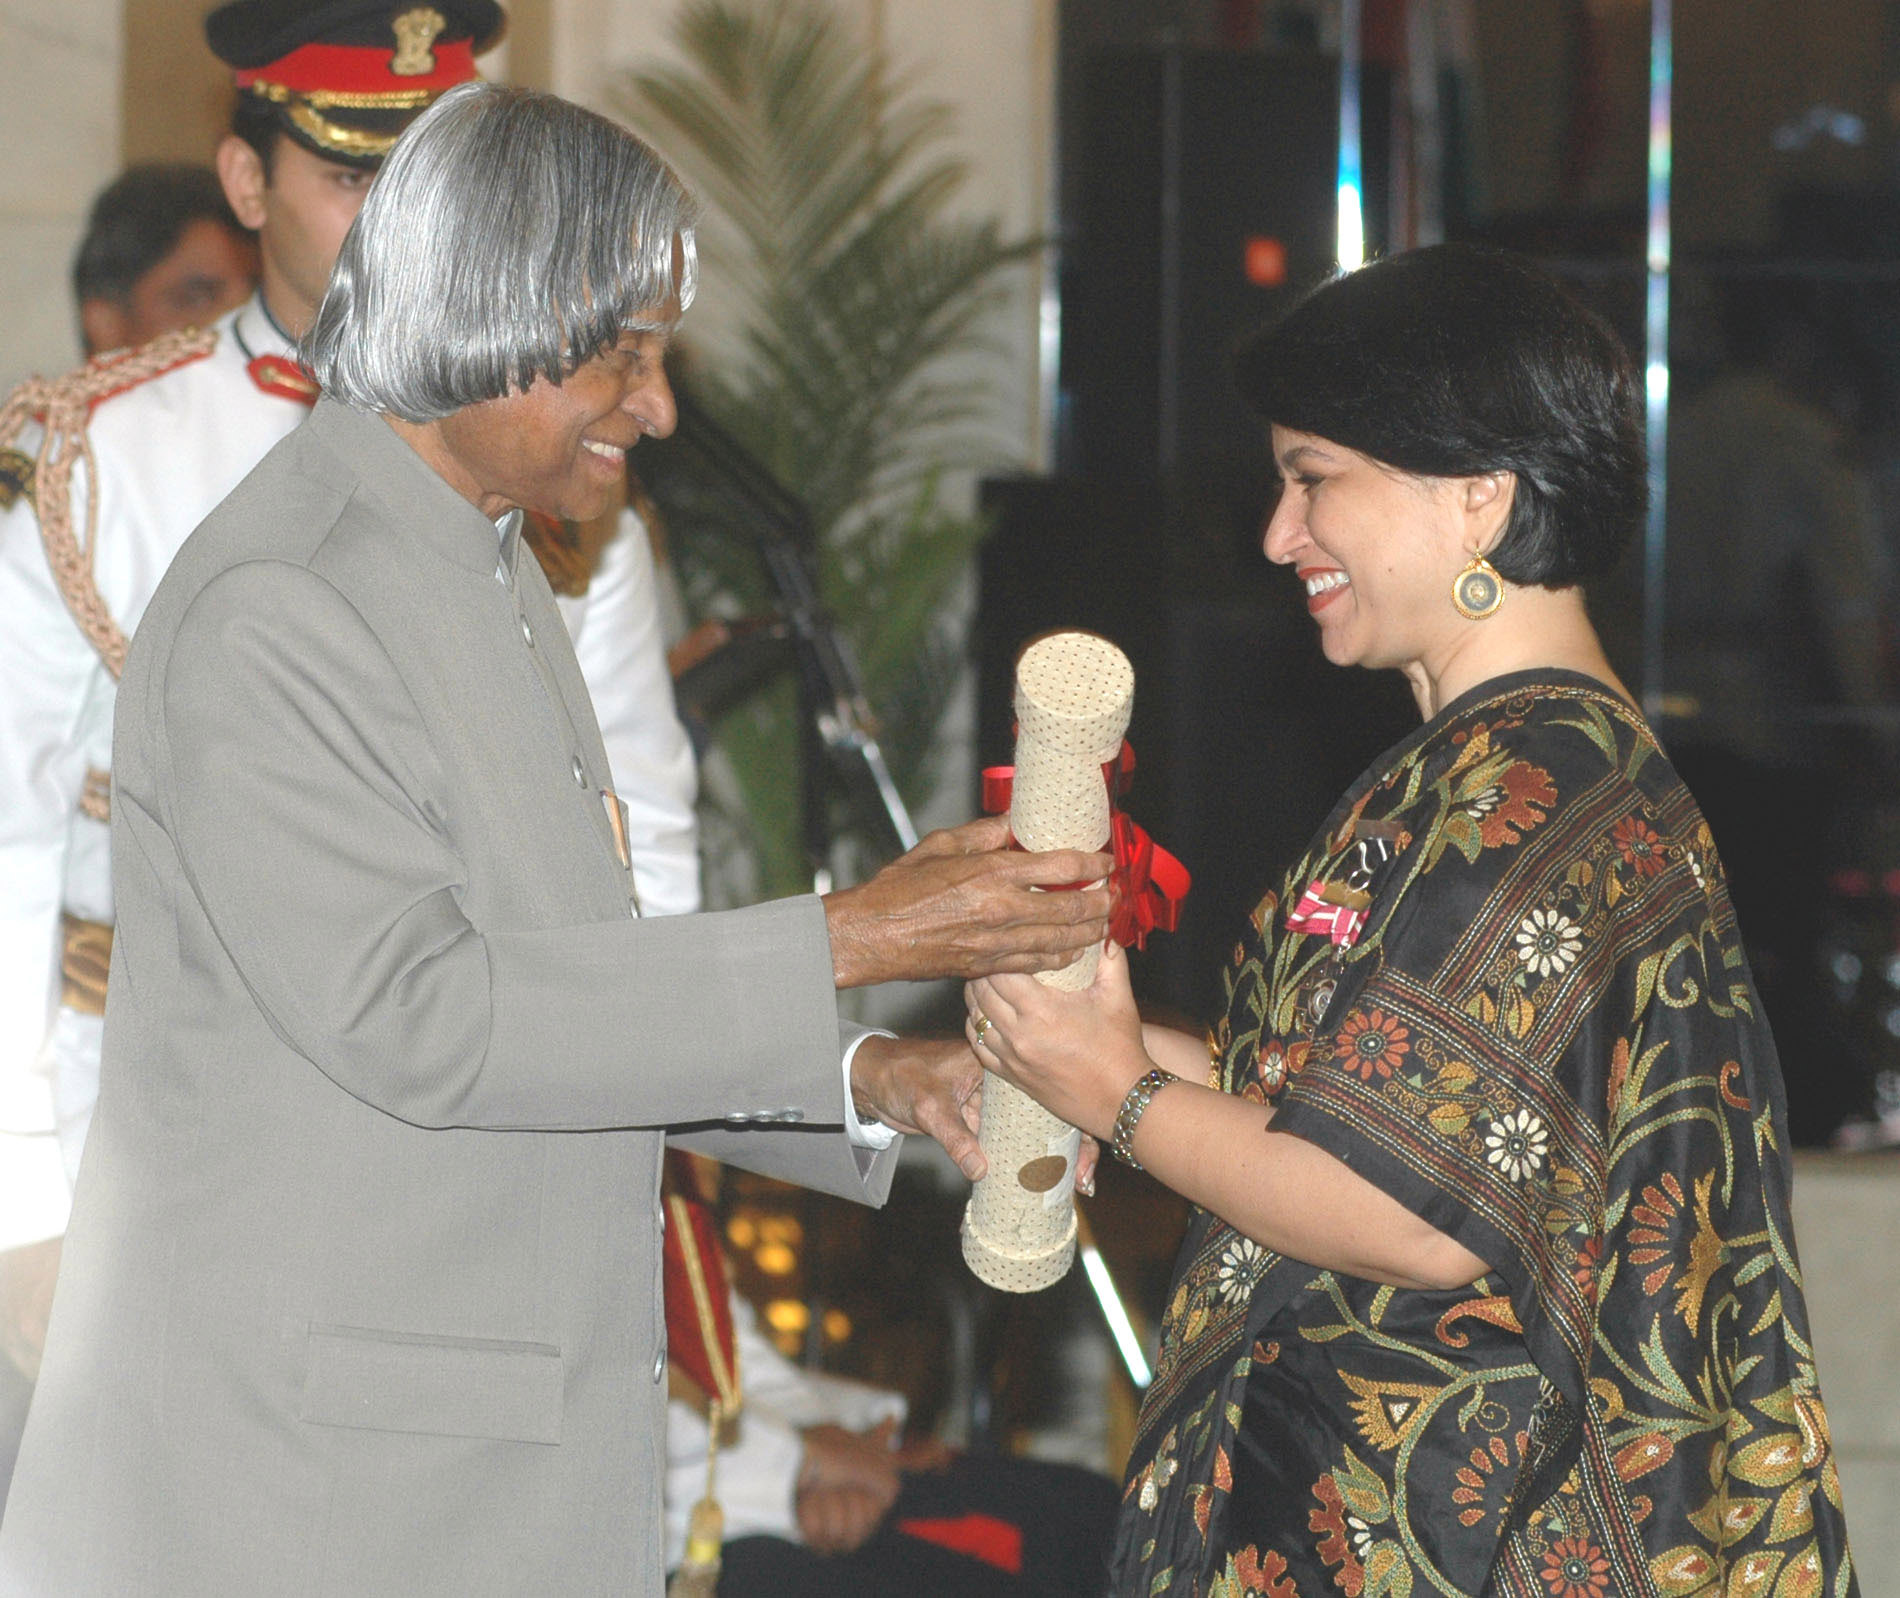 The President, Dr. A.P.J. Abdul Kalam presenting the Padma Shri Award  2006 to Ms. Sucheta Dalal, a well-known business journalist, in New Delhi on March 20, 2006.